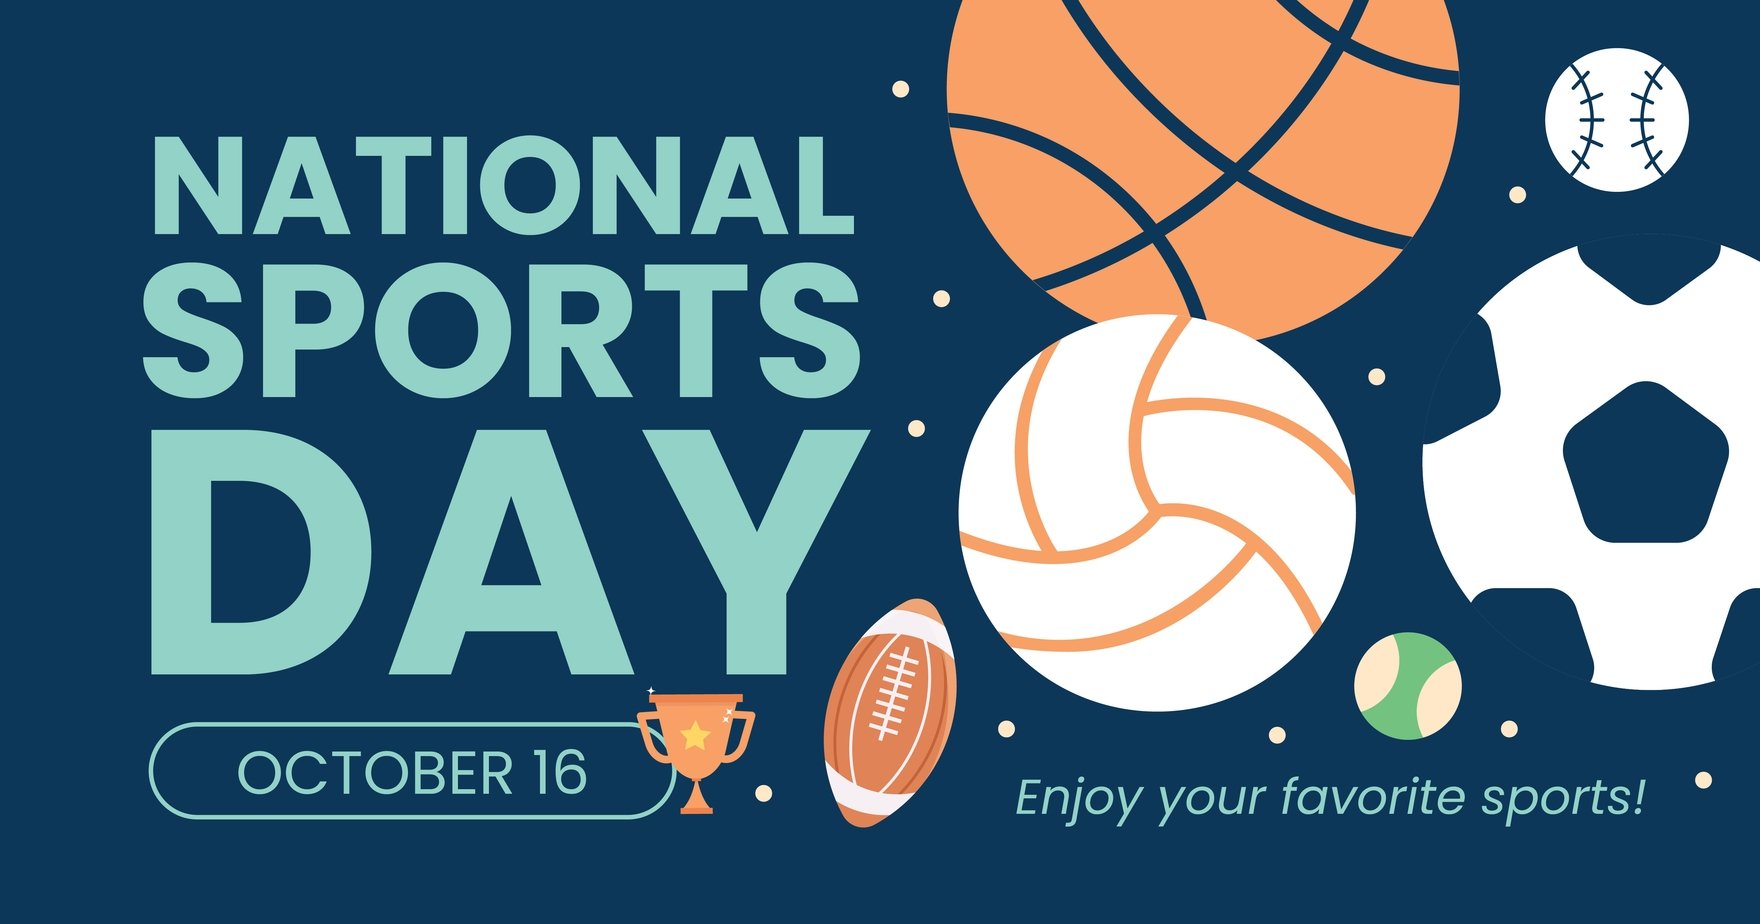 National Sports Day FB Post